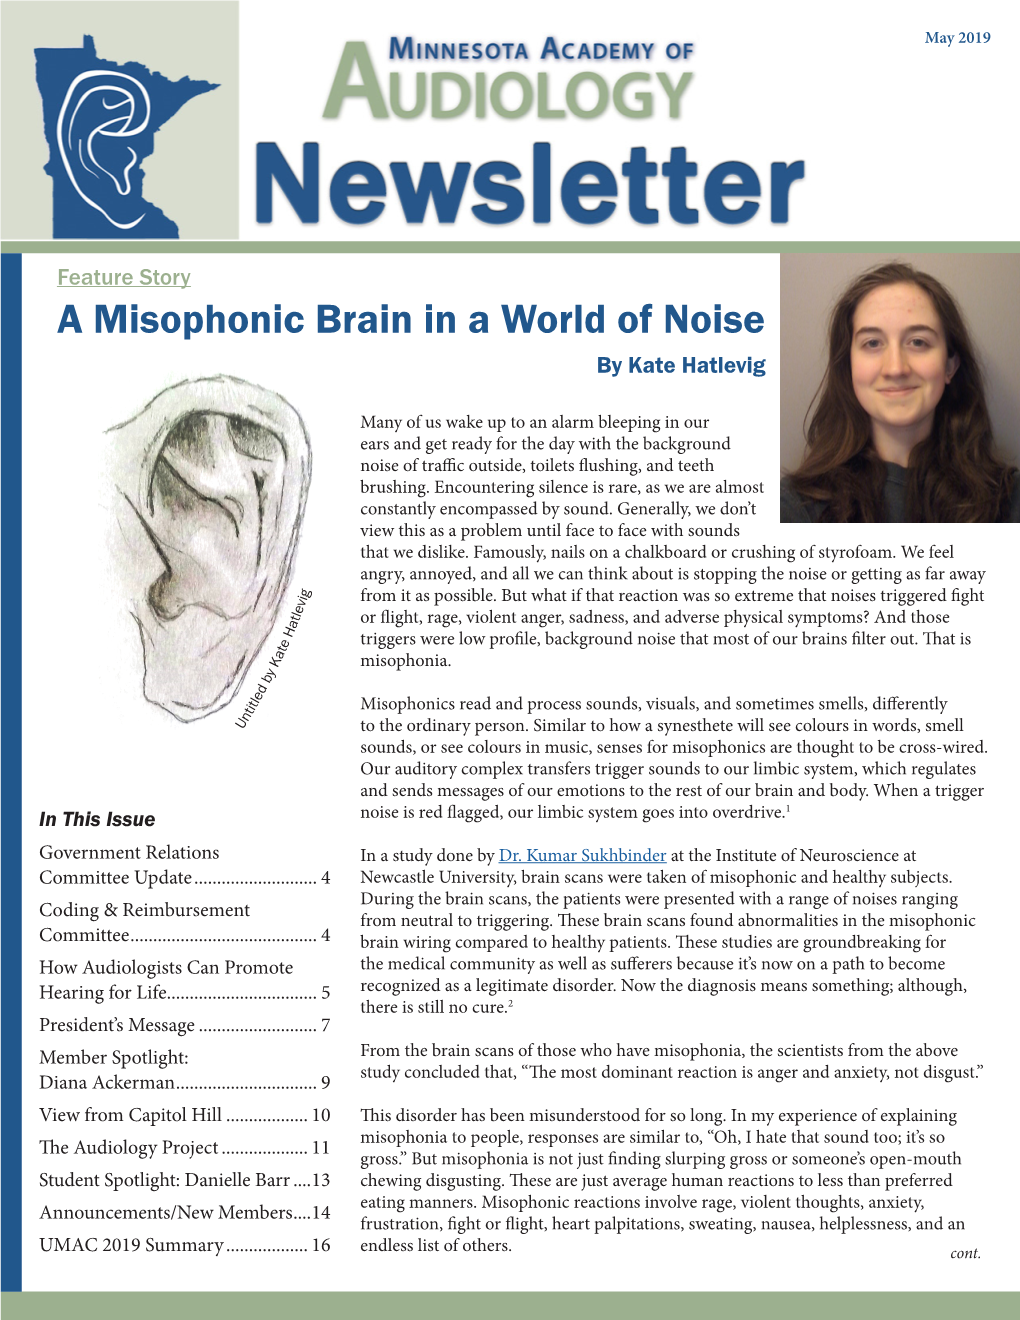 A Misophonic Brain in a World of Noise by Kate Hatlevig